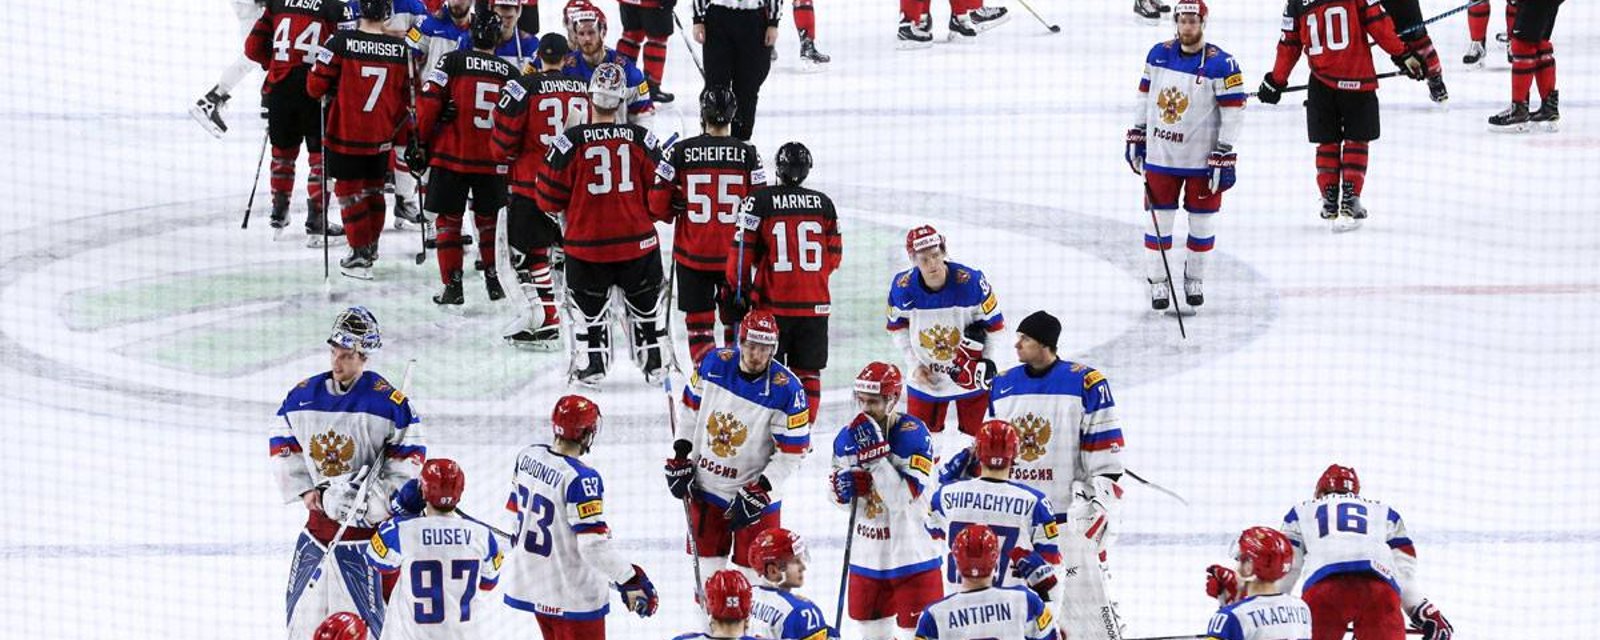 Team Canada makes a unique offer to Team Russia